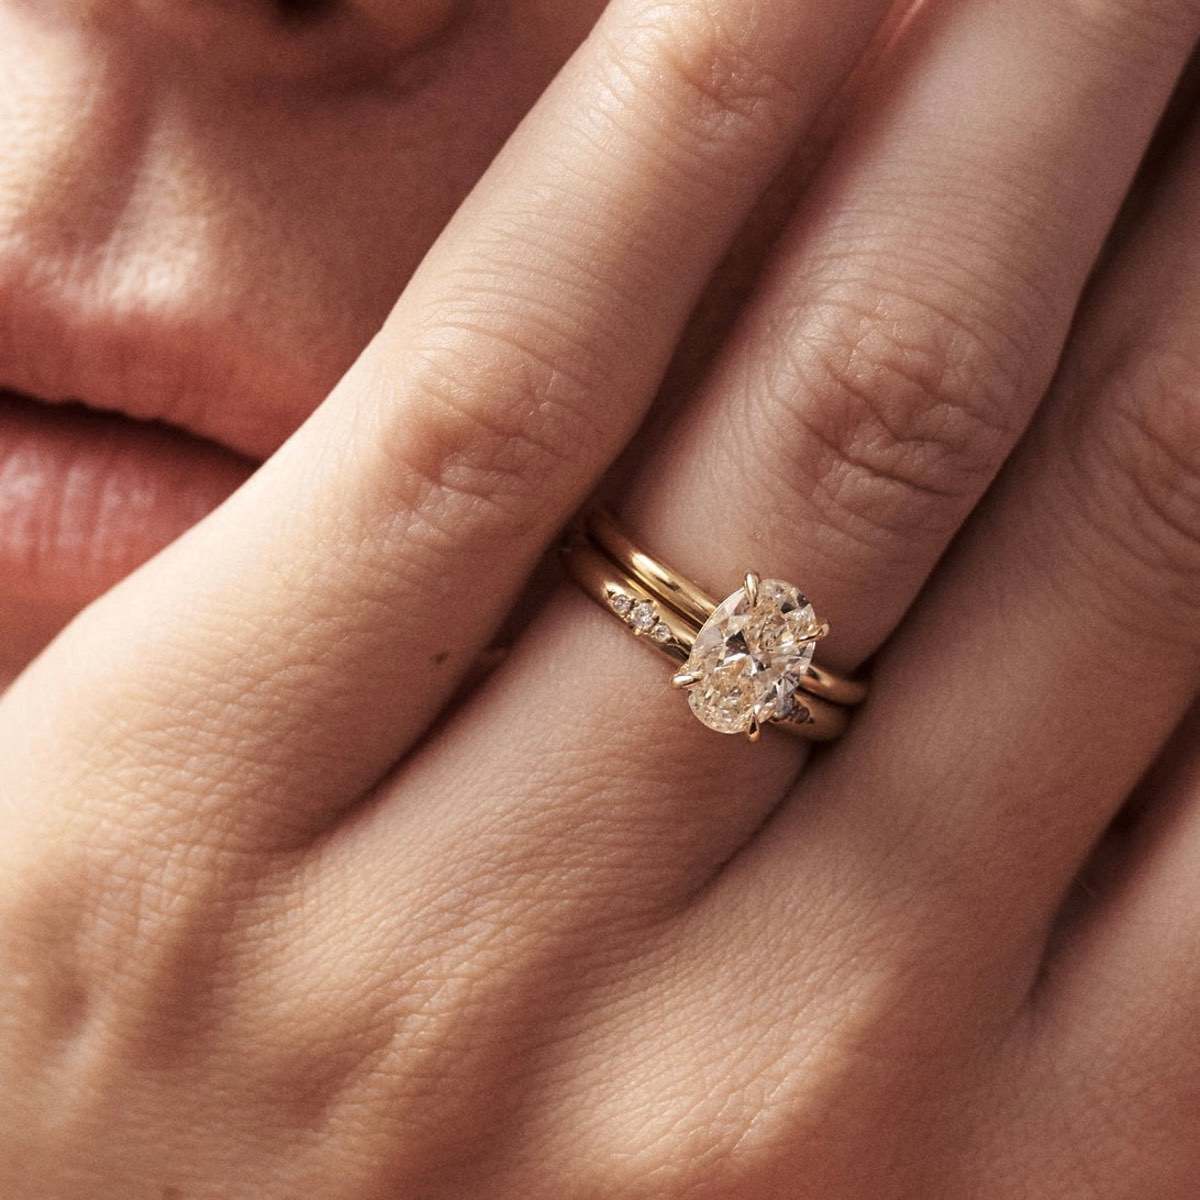 Diamond Engagement Ring with Twisted Band | Kranich's Inc